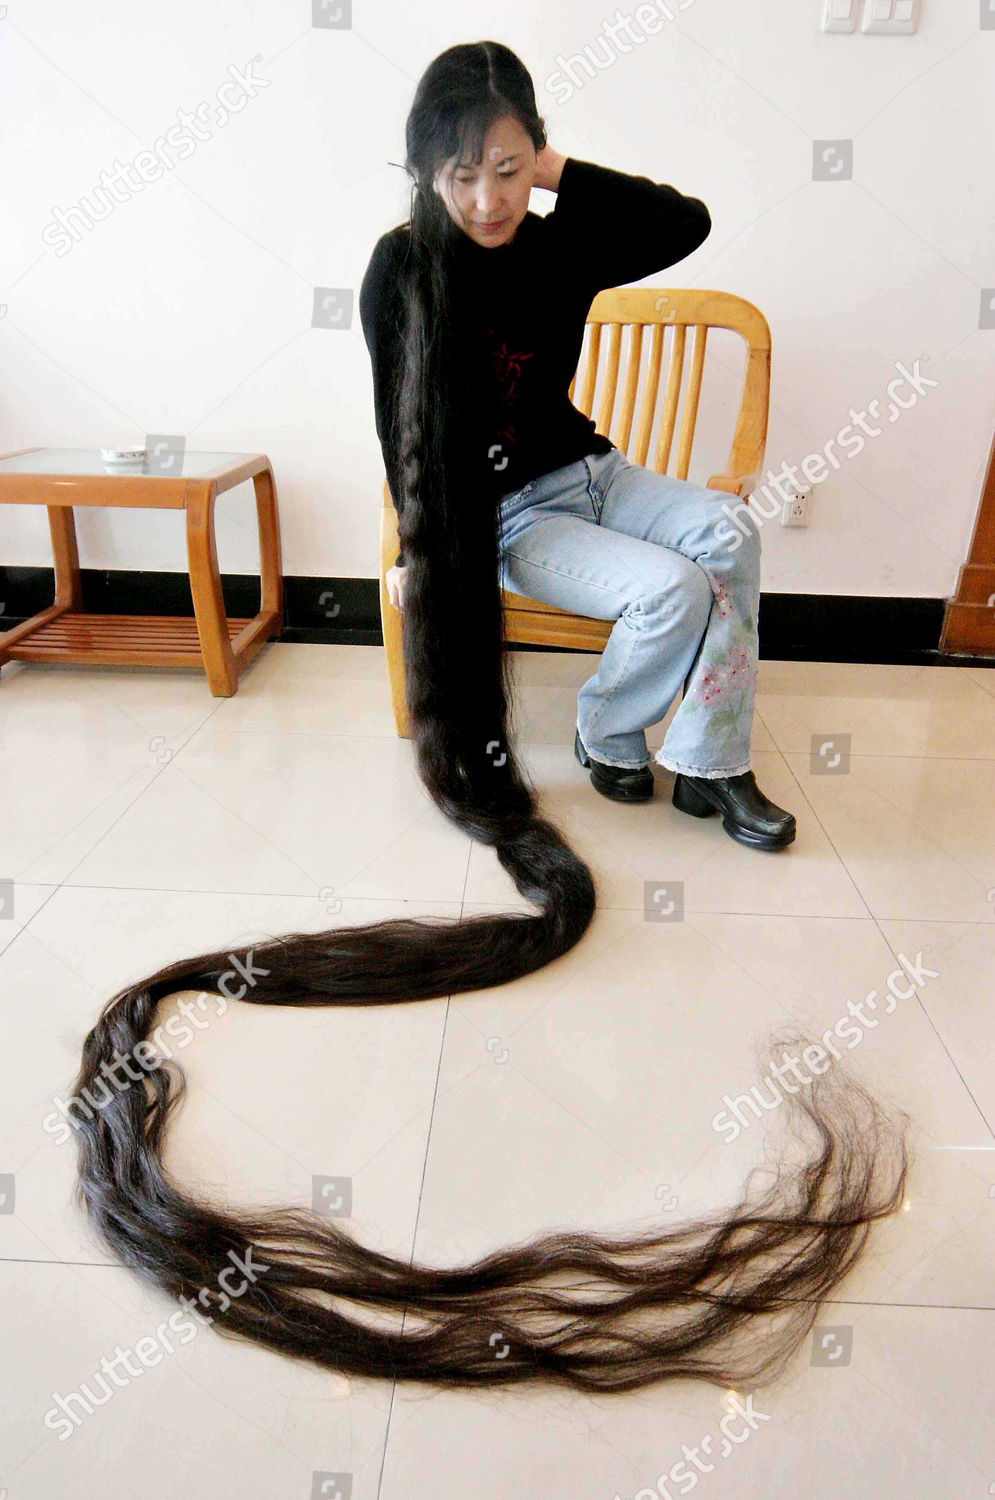 colleen hyde recommends longest pubes in the world pic